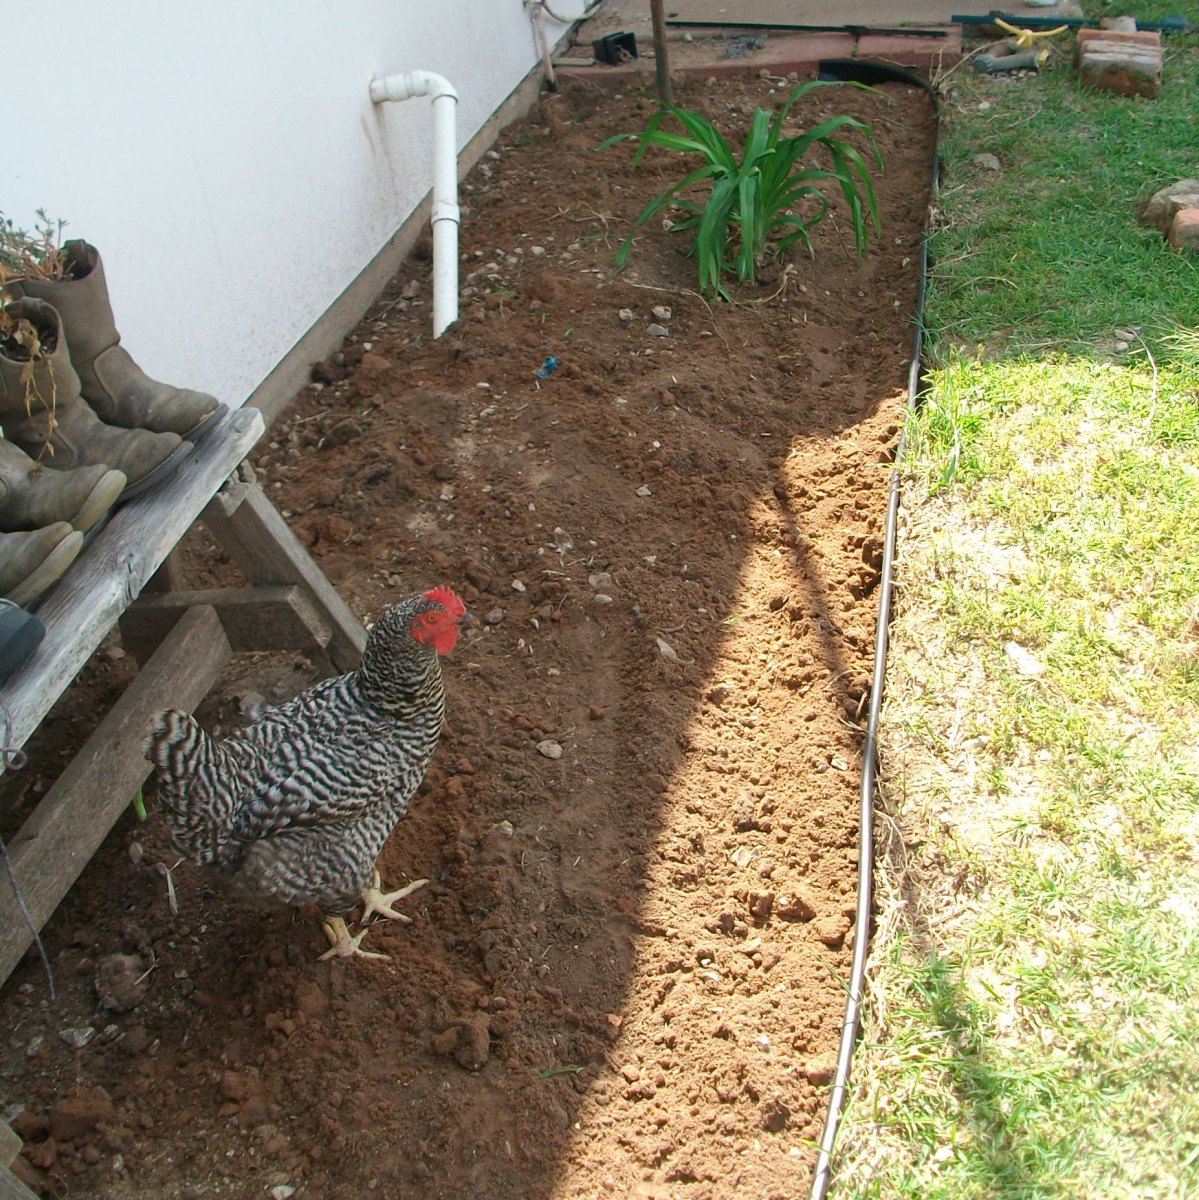 Newly prepared flowerbed using plastic lawn edging